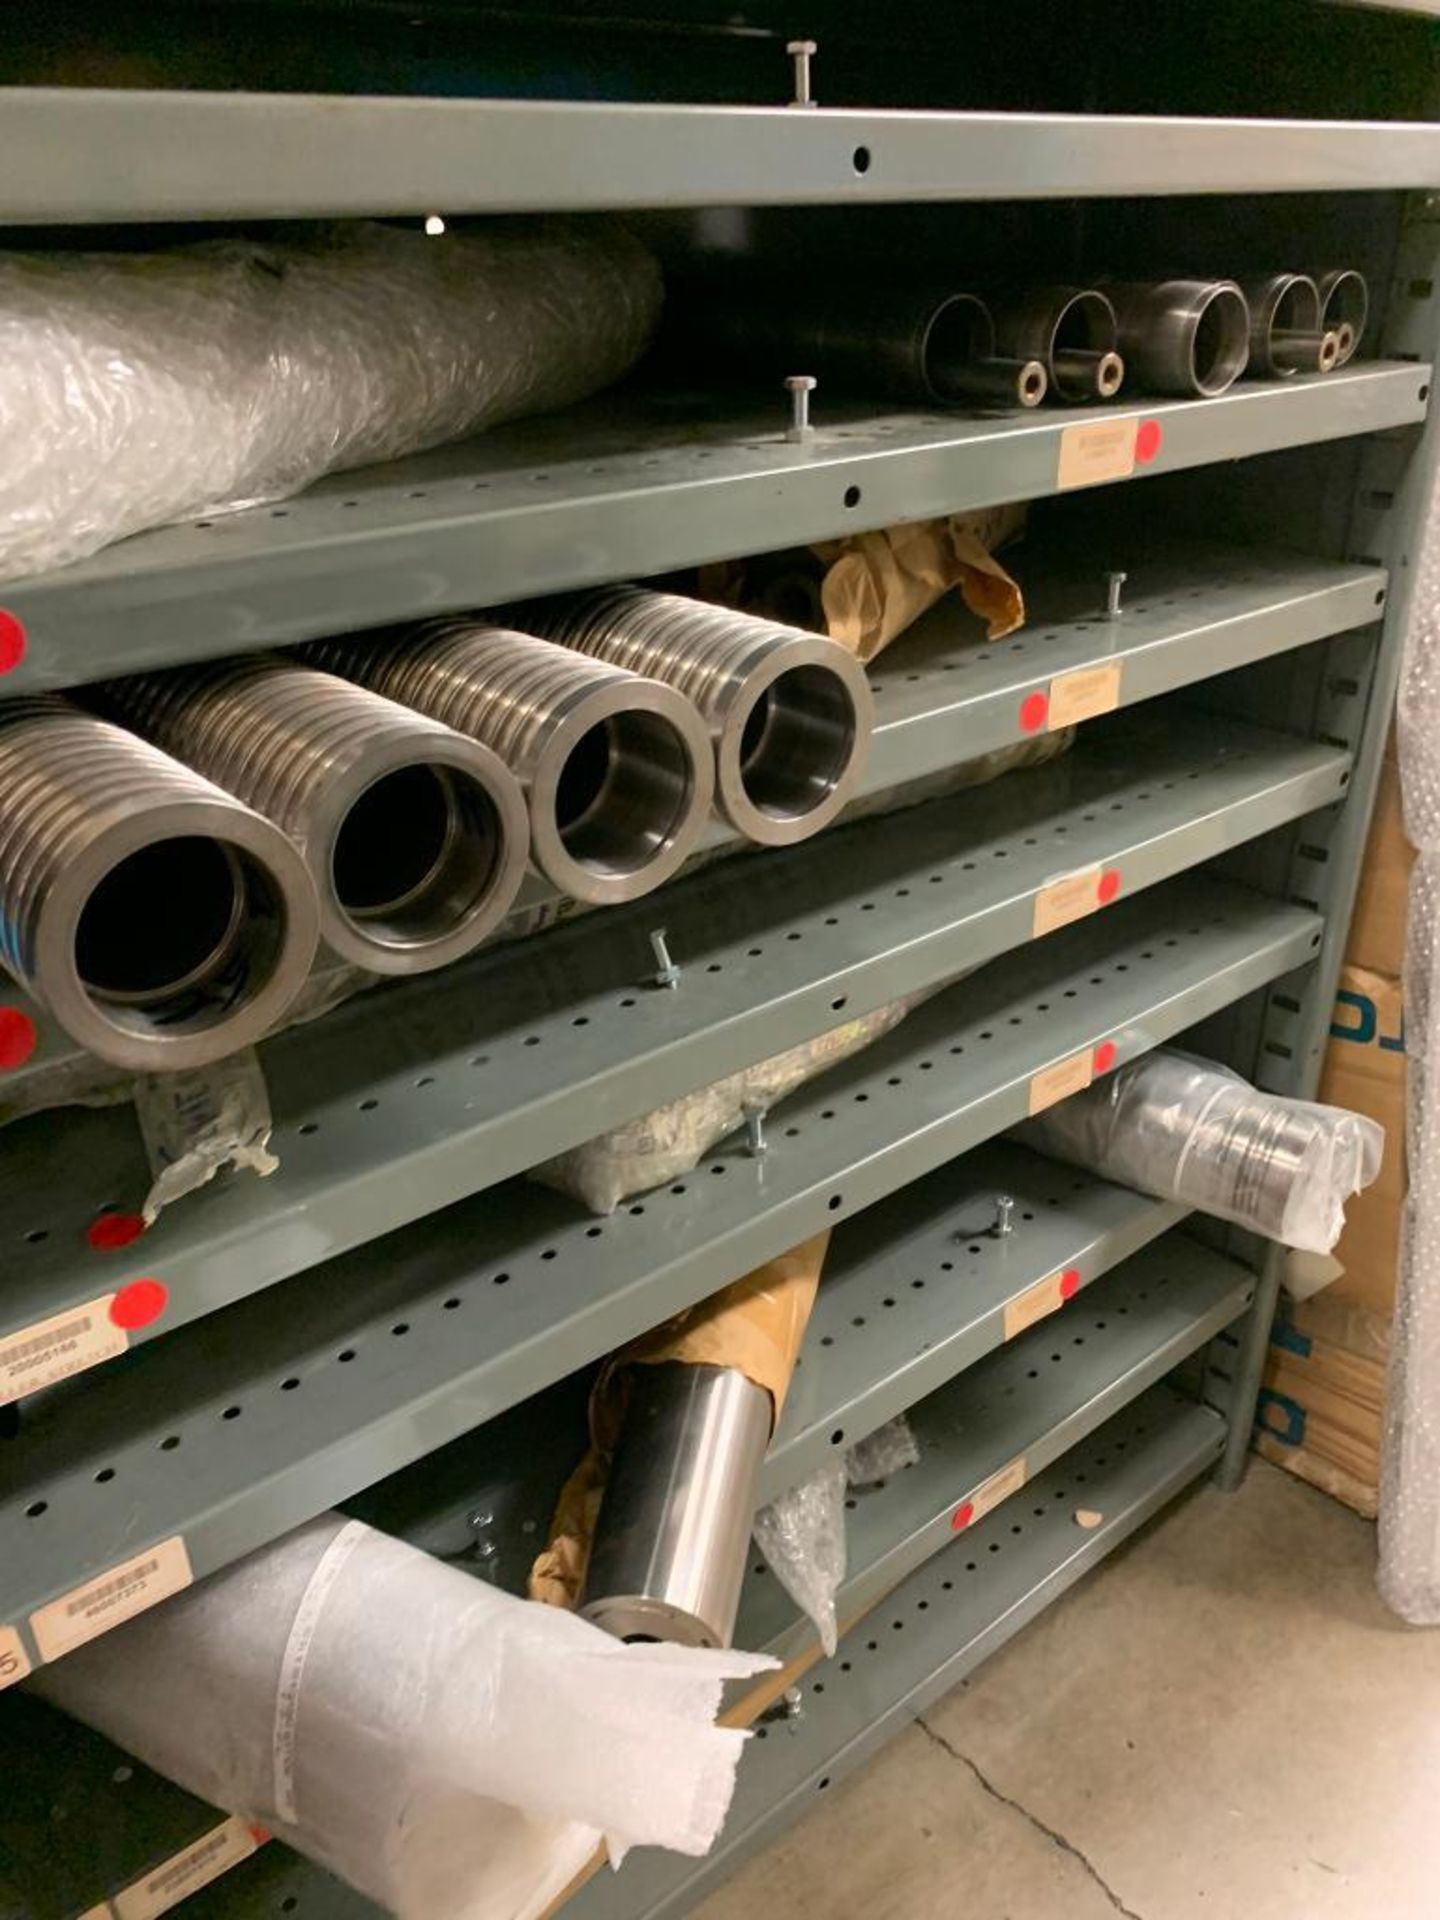 (10x) Bays of Clip Style Shelving w/ Content of Rollers, Roller Chain, Pulleys, Sprockets, Gears, Pa - Image 43 of 46